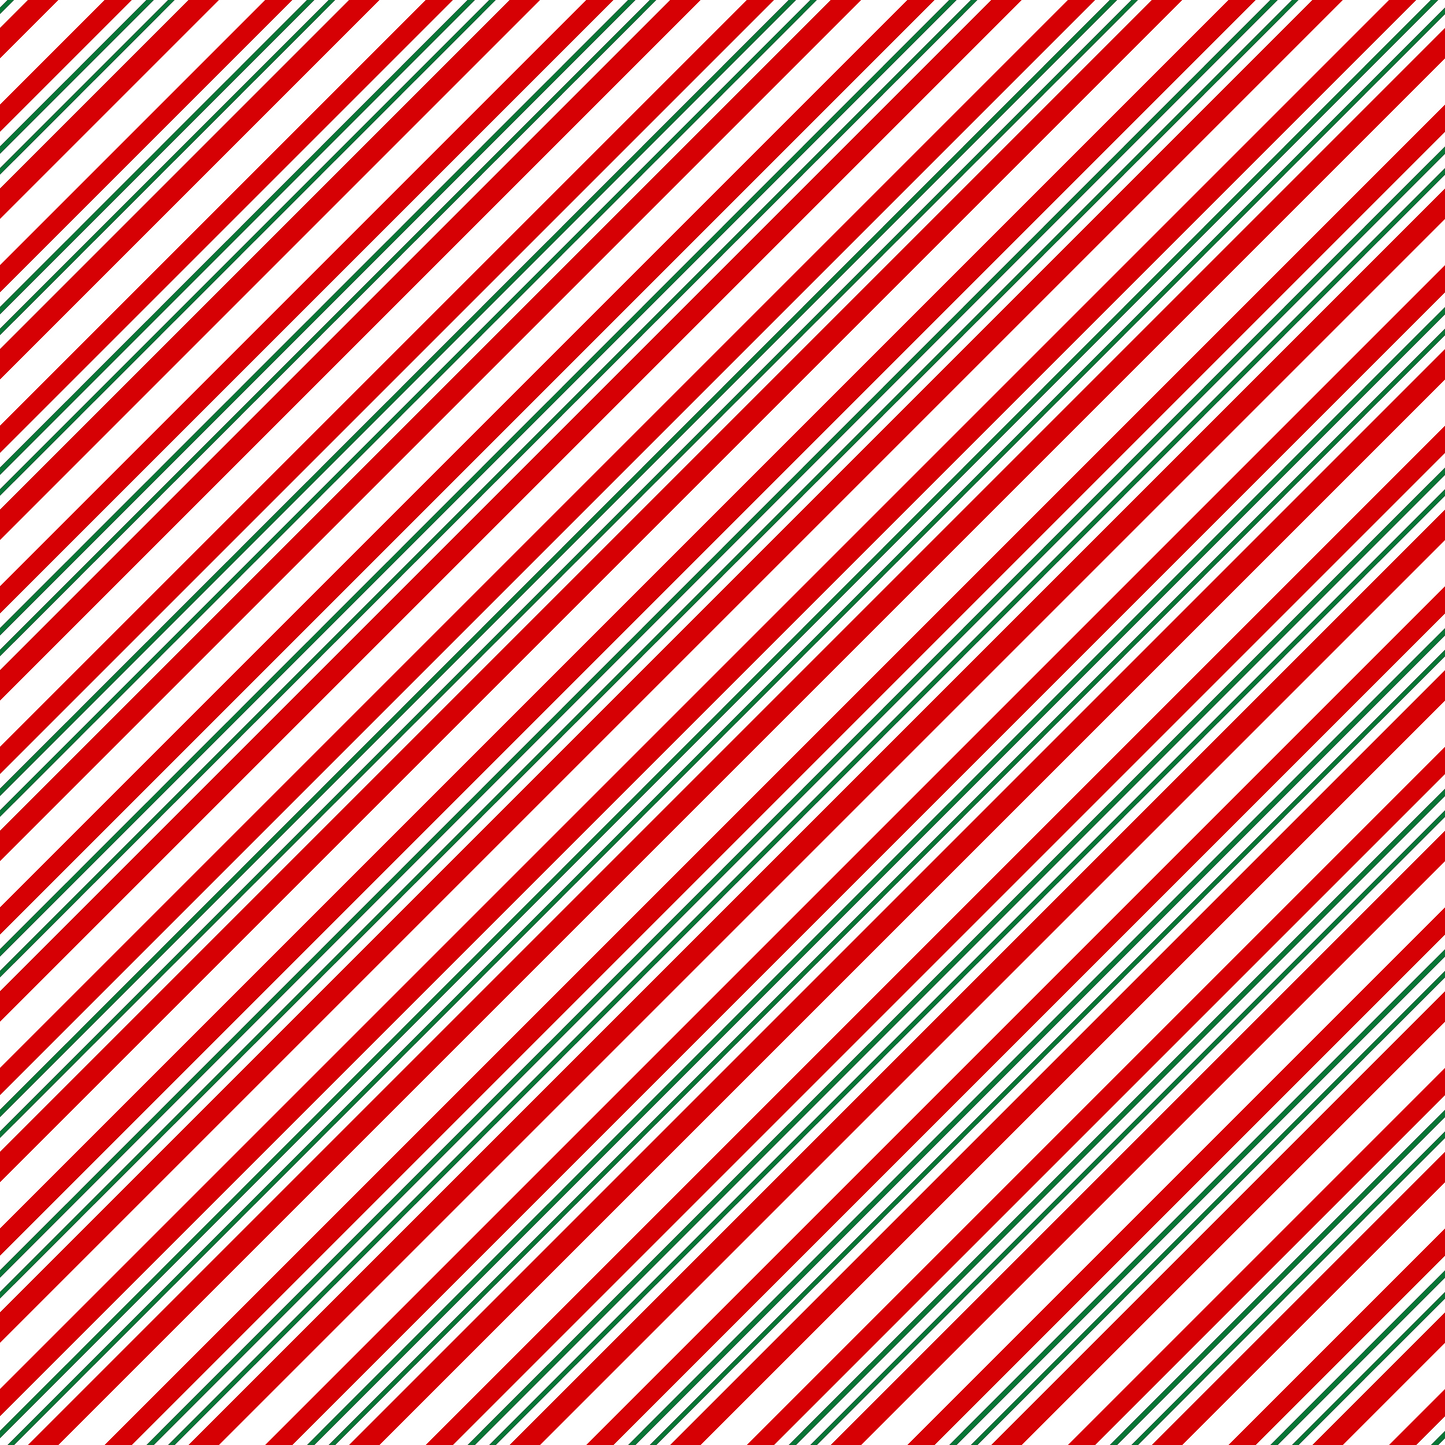 Candy Cane Stripes - Red and Green Stripes 011